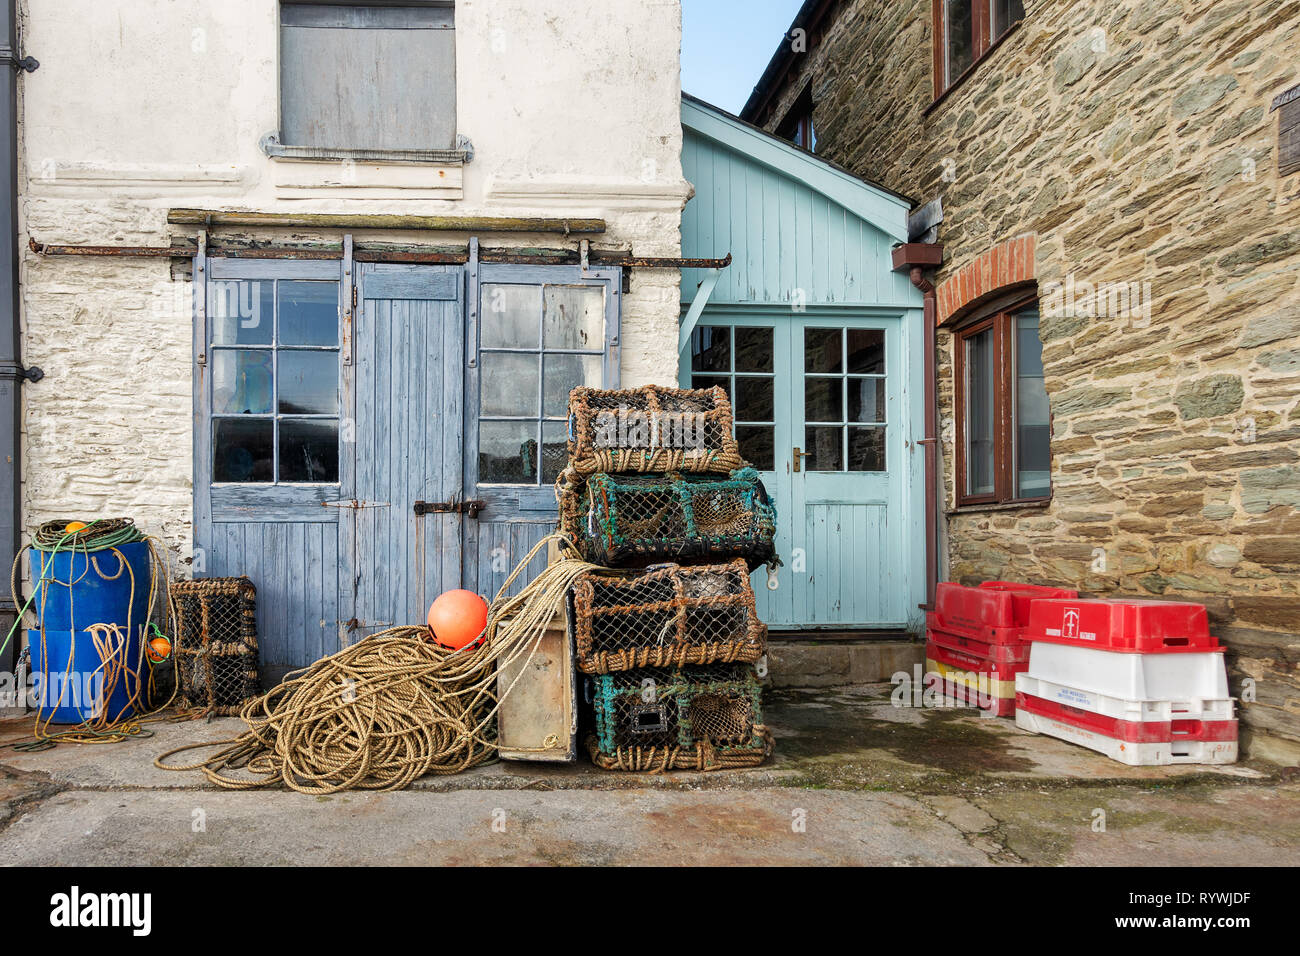 A fisherman's shed on the quayside at Salcolmbe, Devon. There are crab pots, ropes, floats and fish boxes outside the shed. Stock Photo